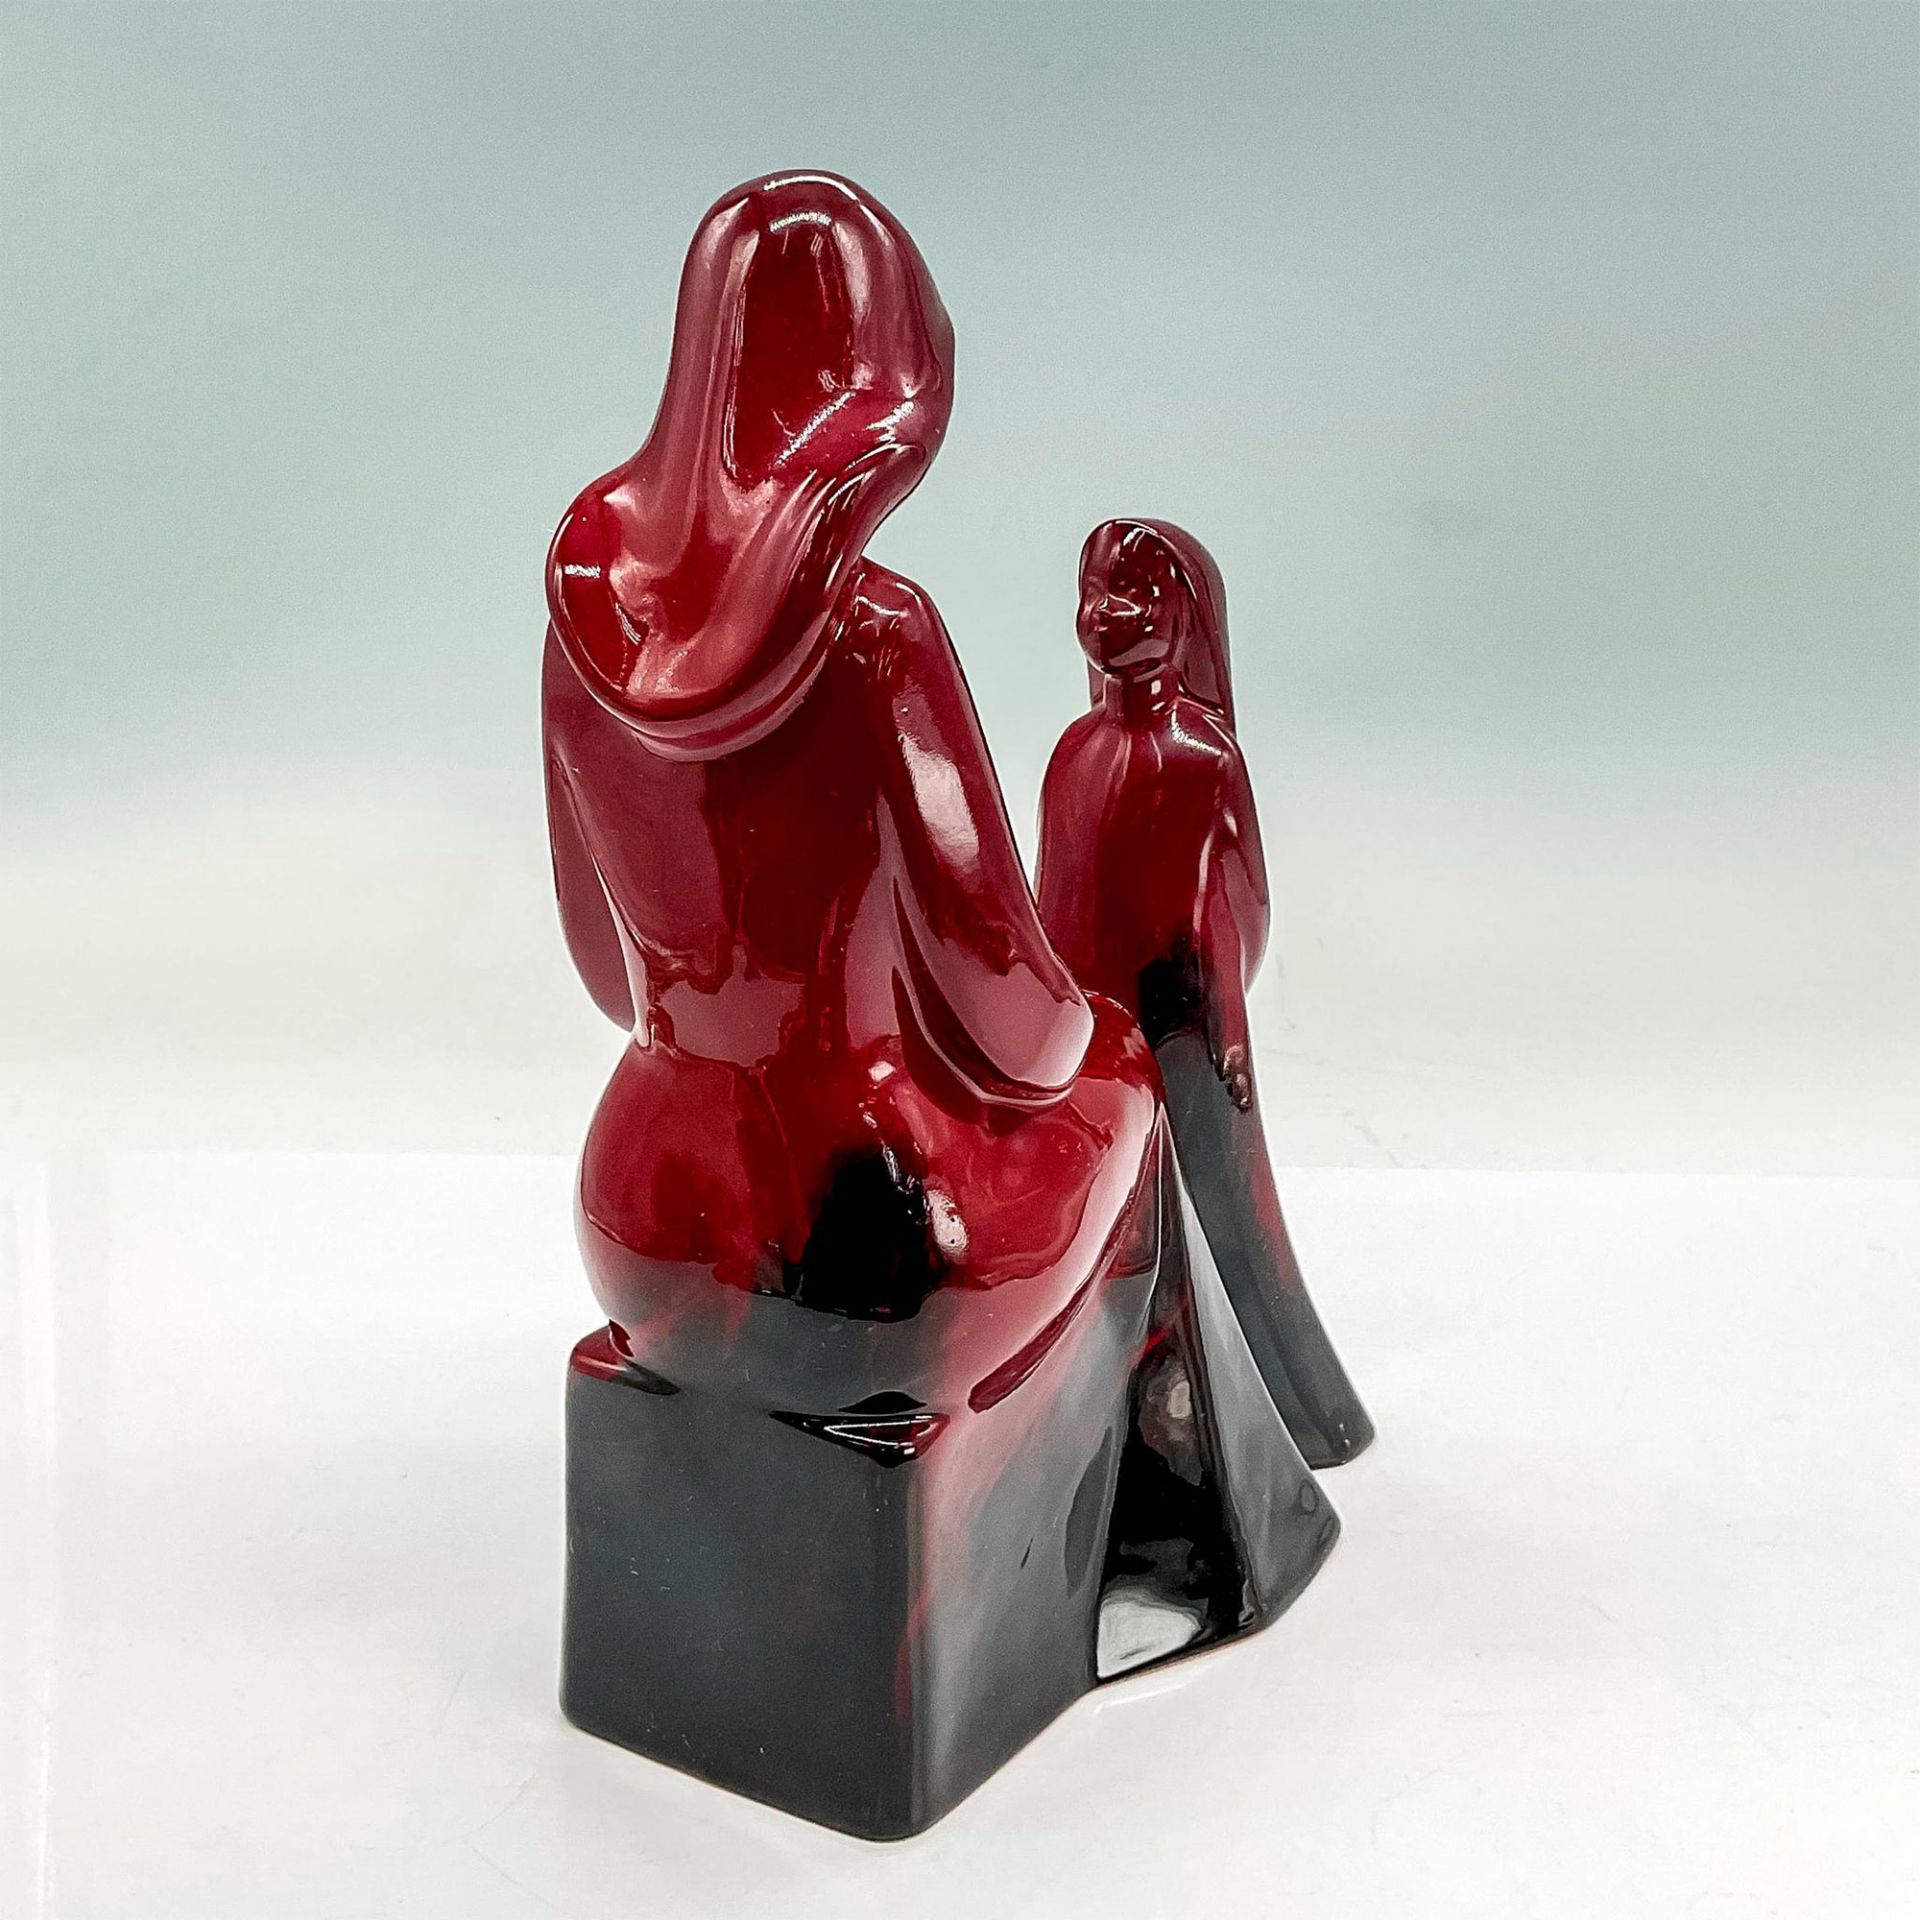 Mother and Daughter - Royal Doulton Flambe Prototype Figurine - Bild 3 aus 4